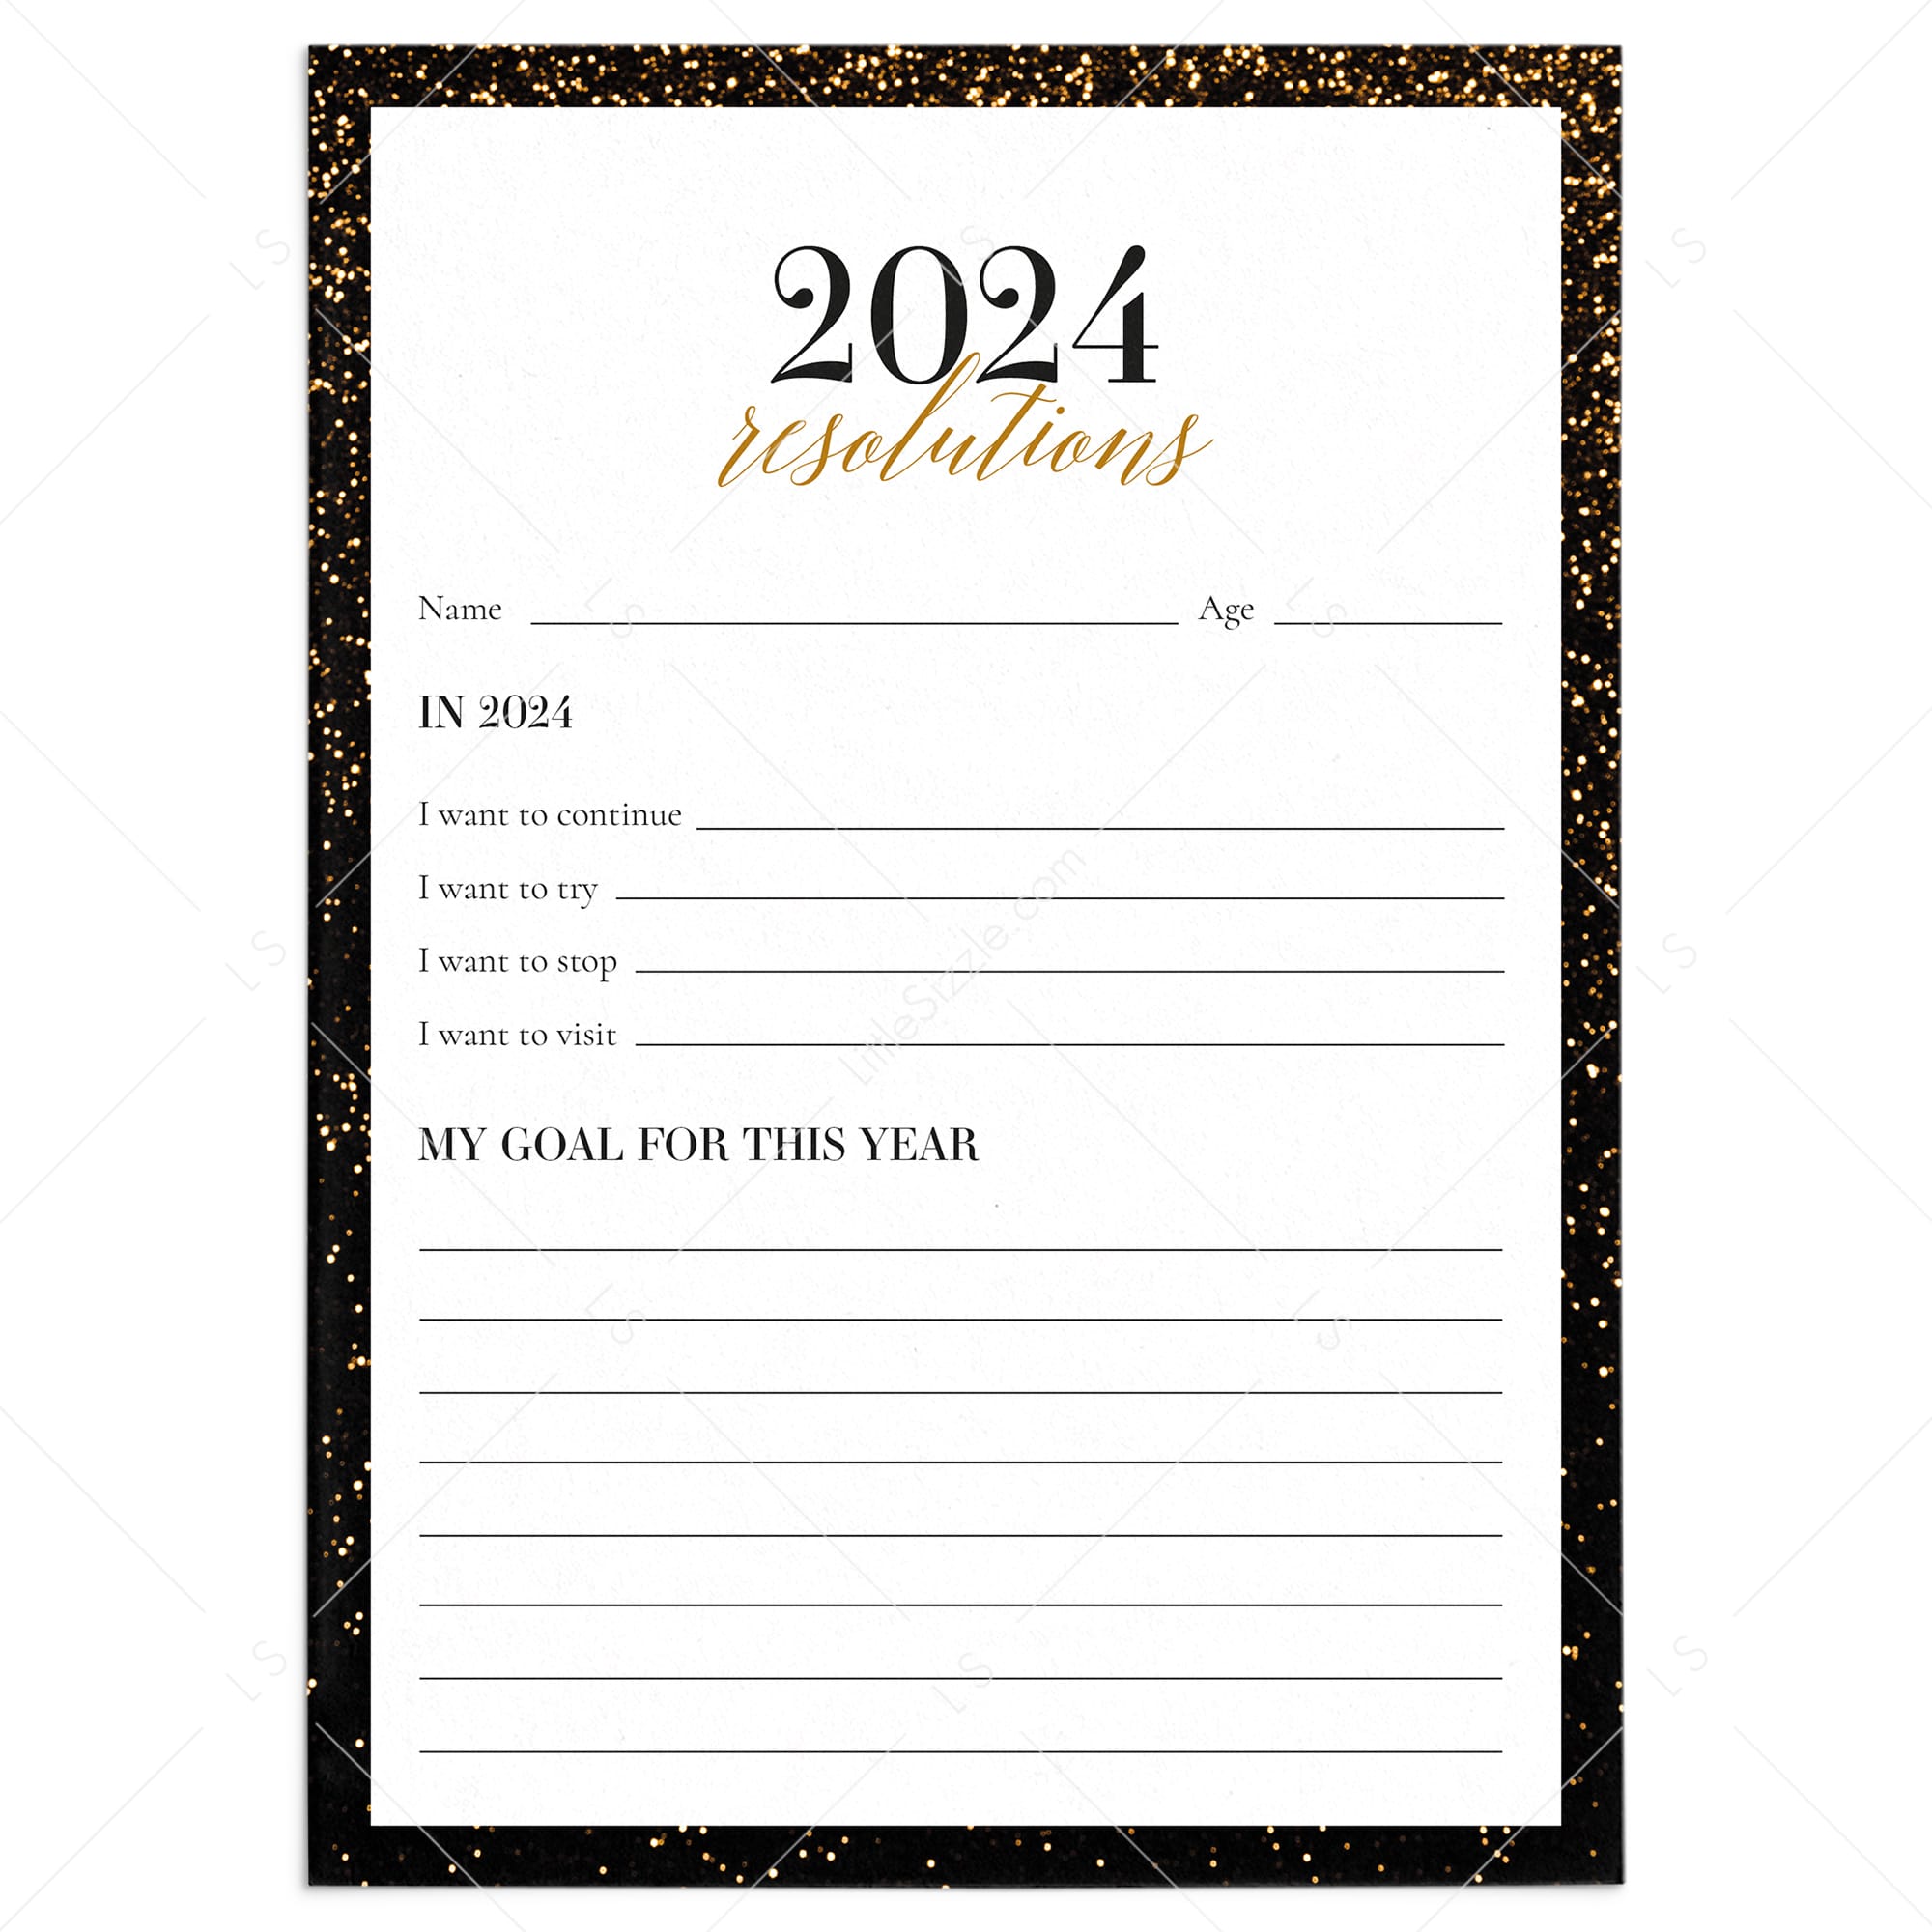 2024 Resolutions and New Year's Goals Card Printable Instant Download LittleSizzle